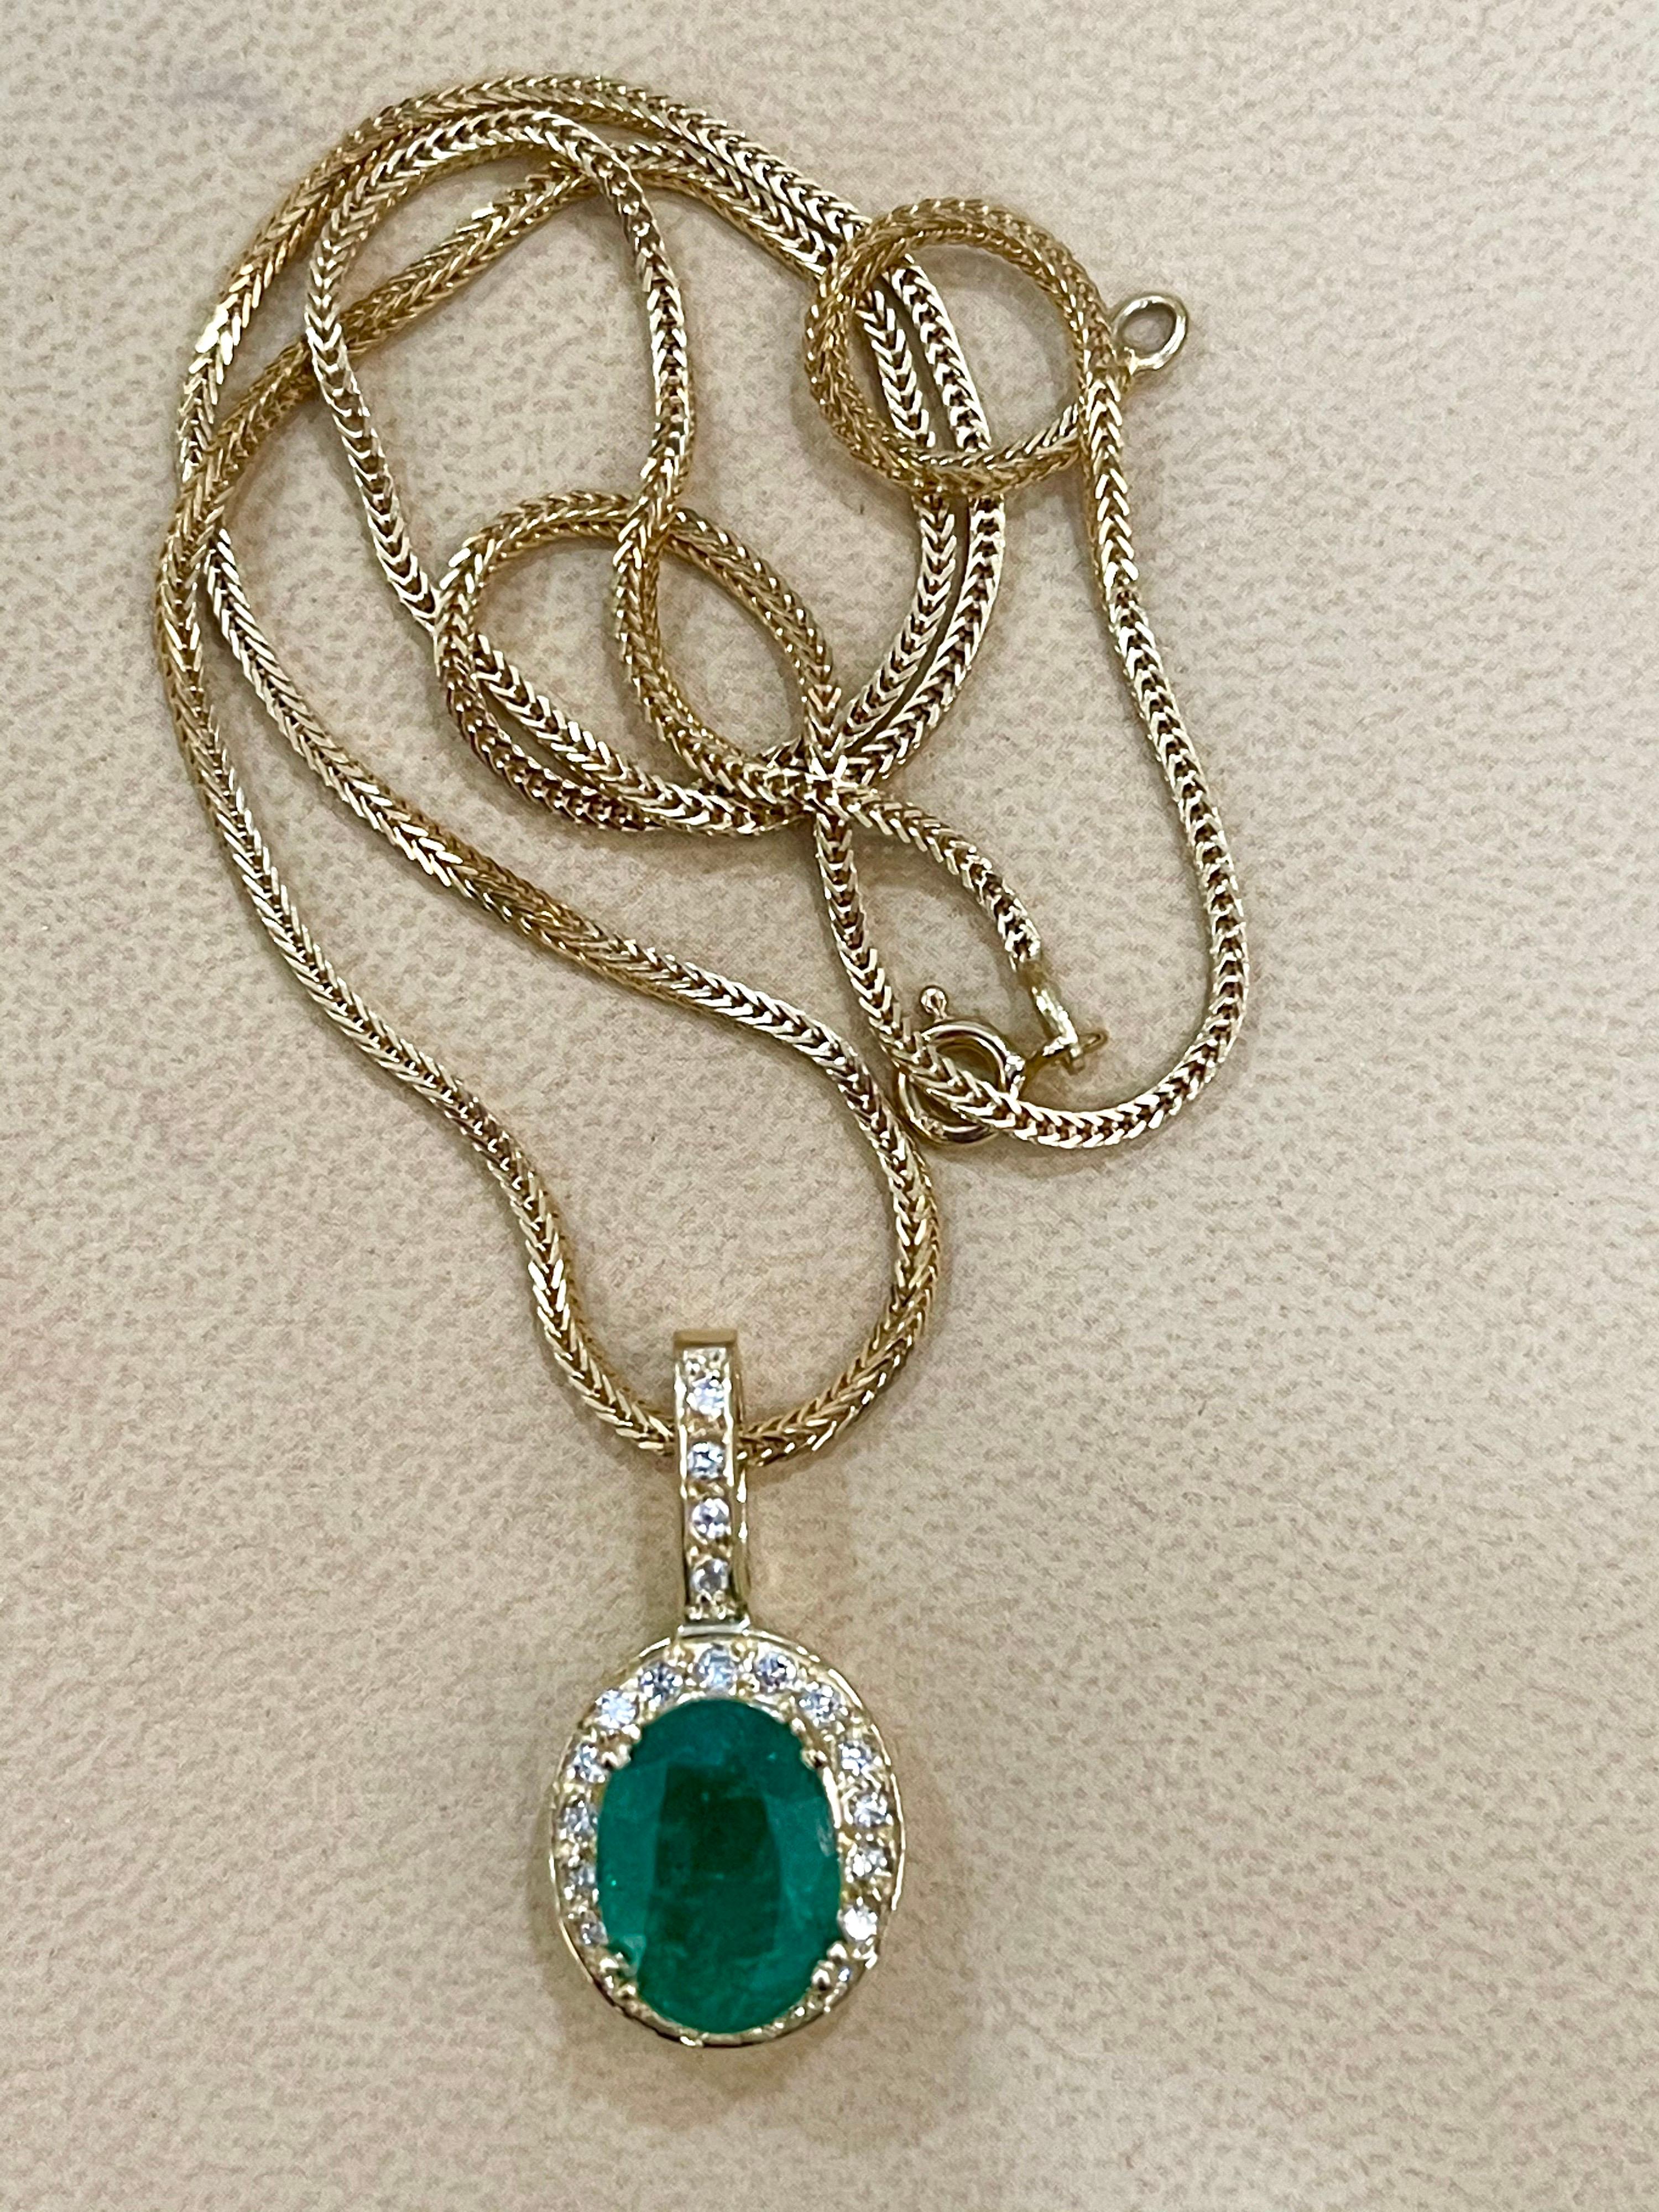 4.0 Ct Natural Oval Shape Emerald & Diamond Pendant 14 Karat Yellow Gold Chain In Excellent Condition For Sale In New York, NY